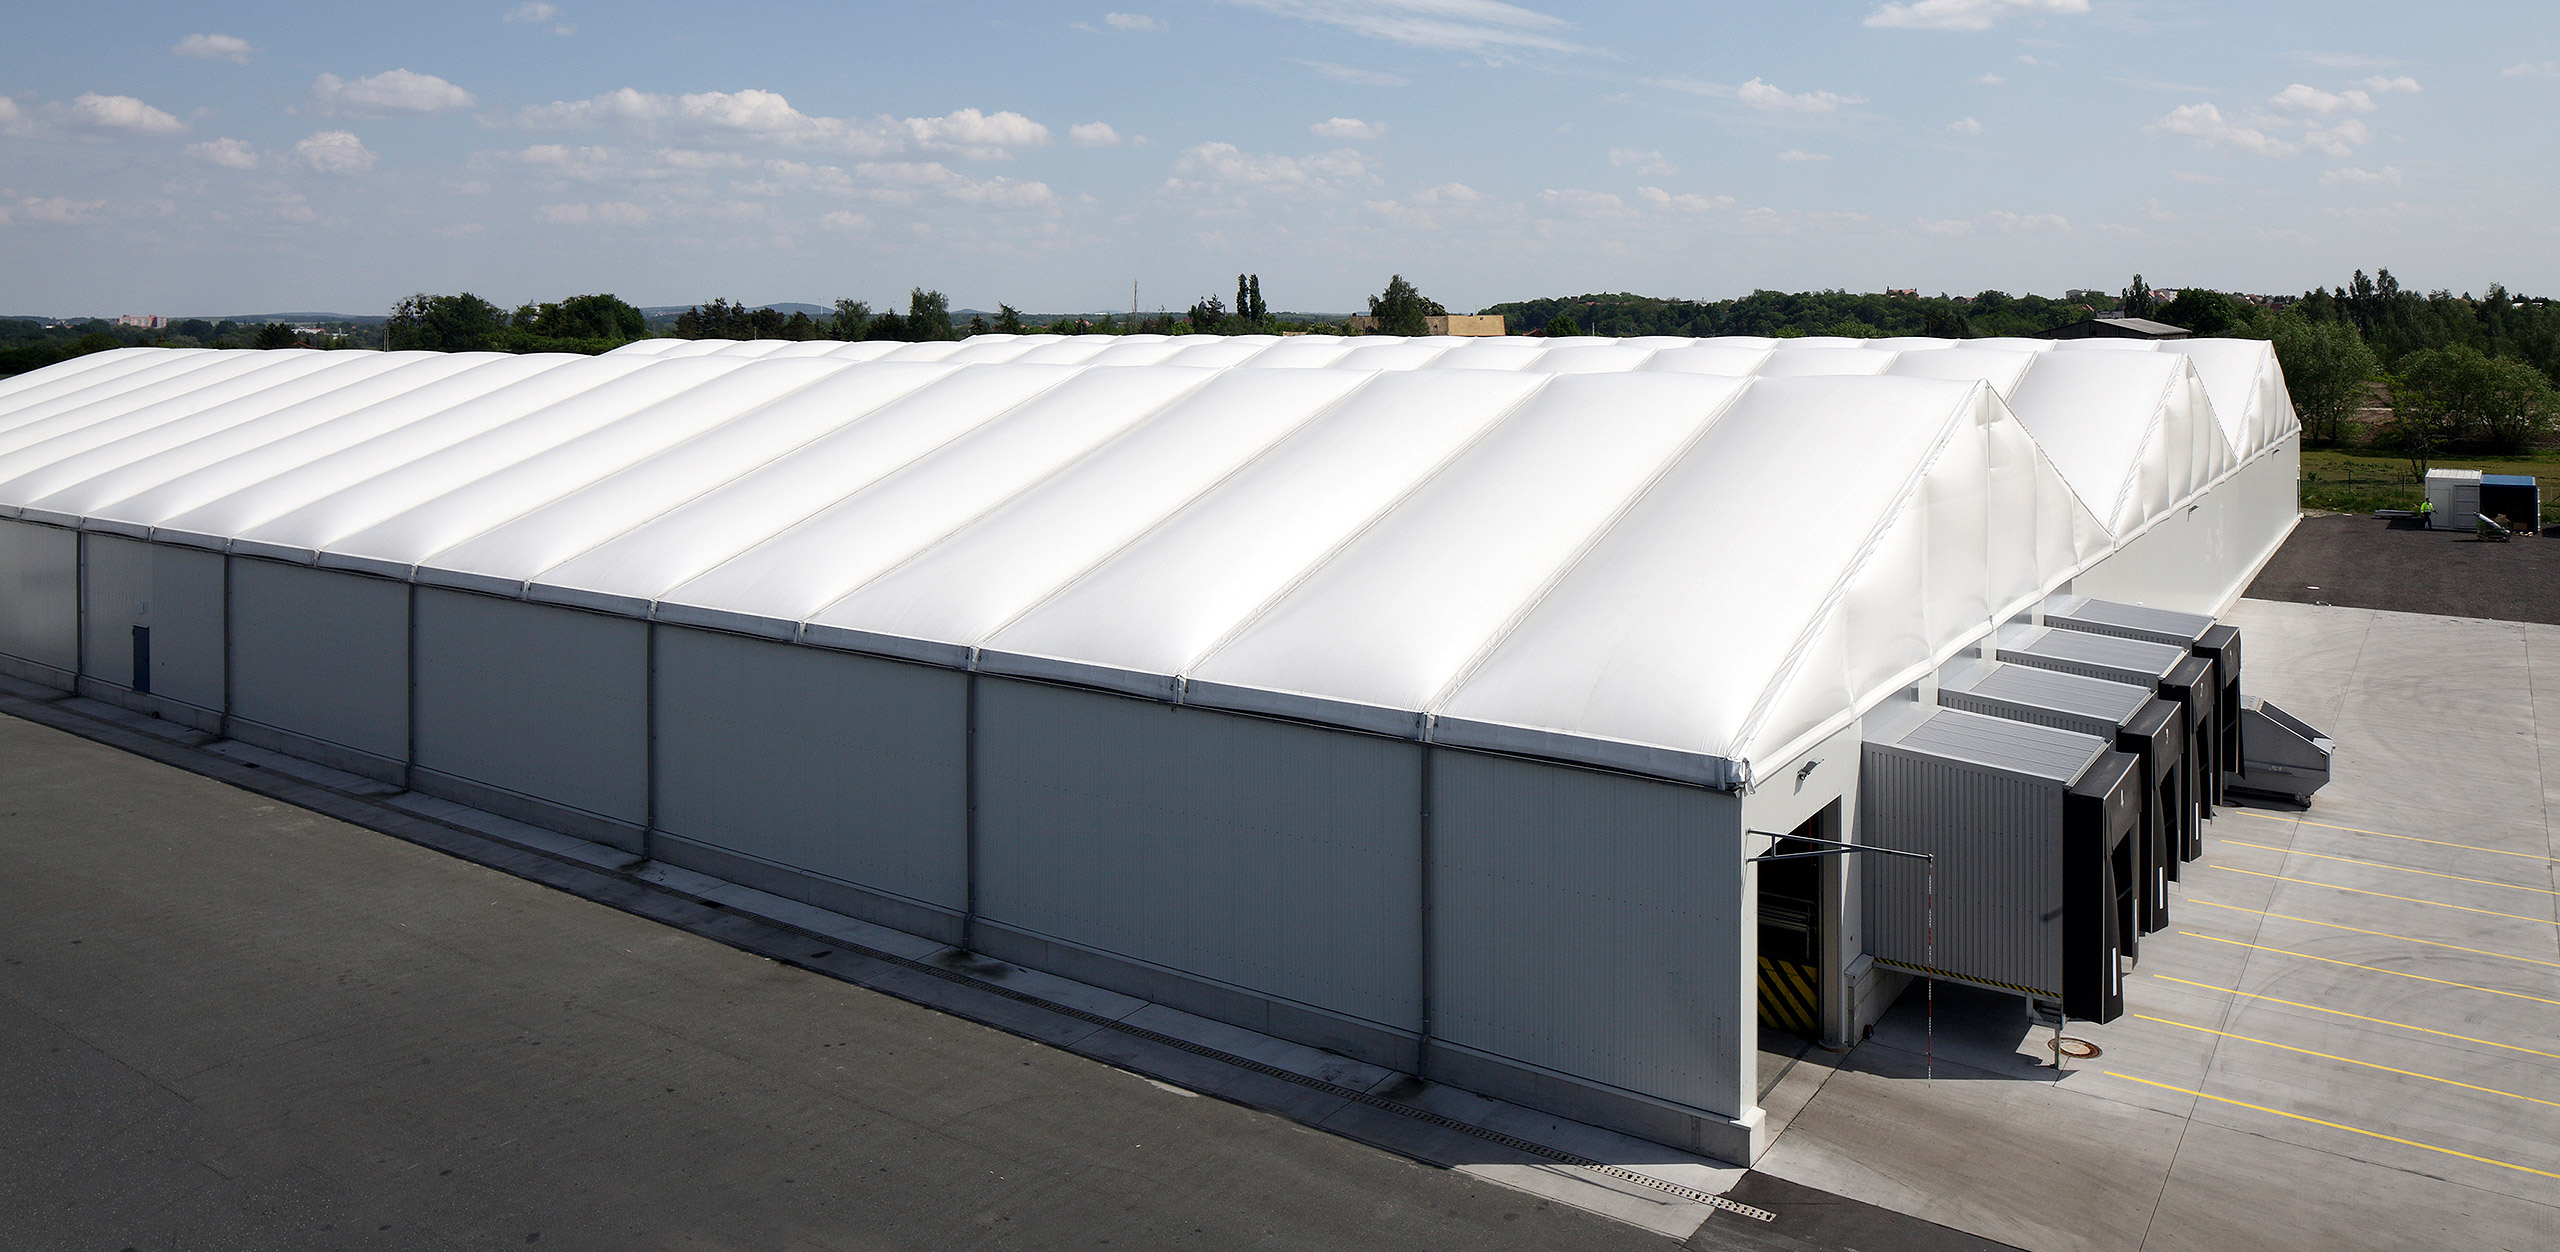 Frankenbrunnen Logistics Halls - side view with dock stations for lories